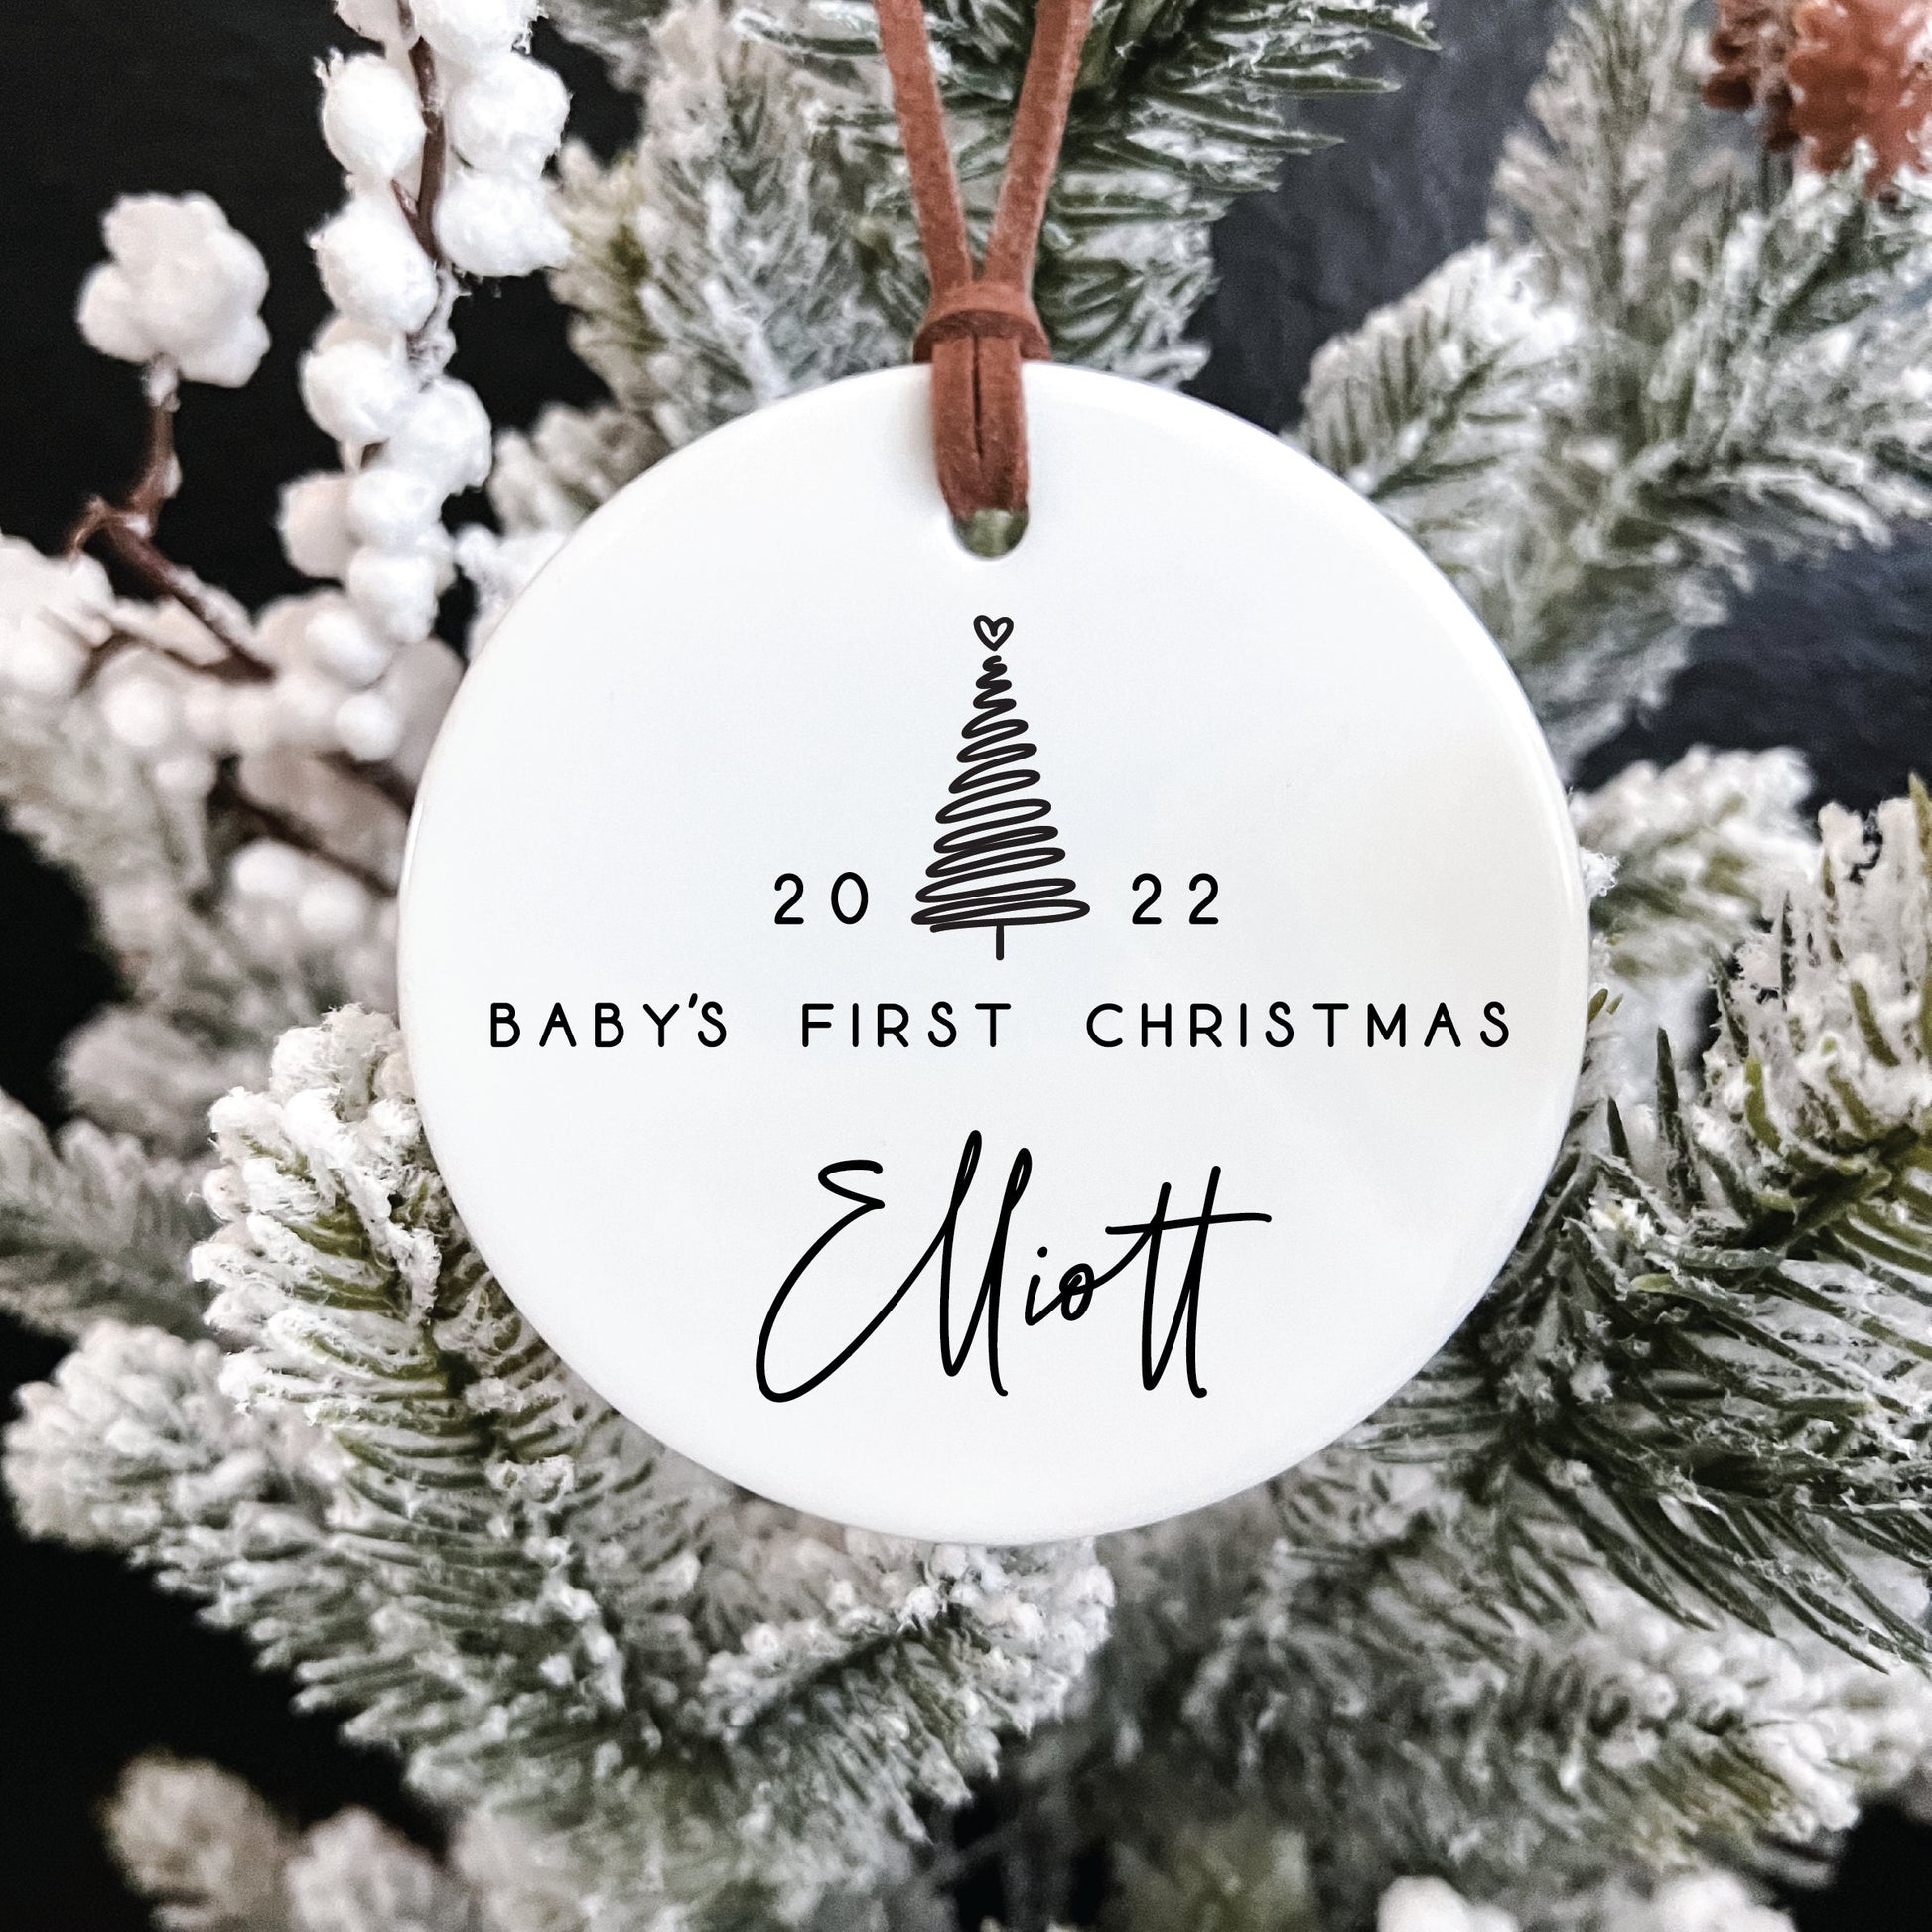 Baby's First Christmas Ornament / Ceramic Porcelain Ornament / Baby Birth Stats / Personalized Newborn Ornament / Gift for New Parents